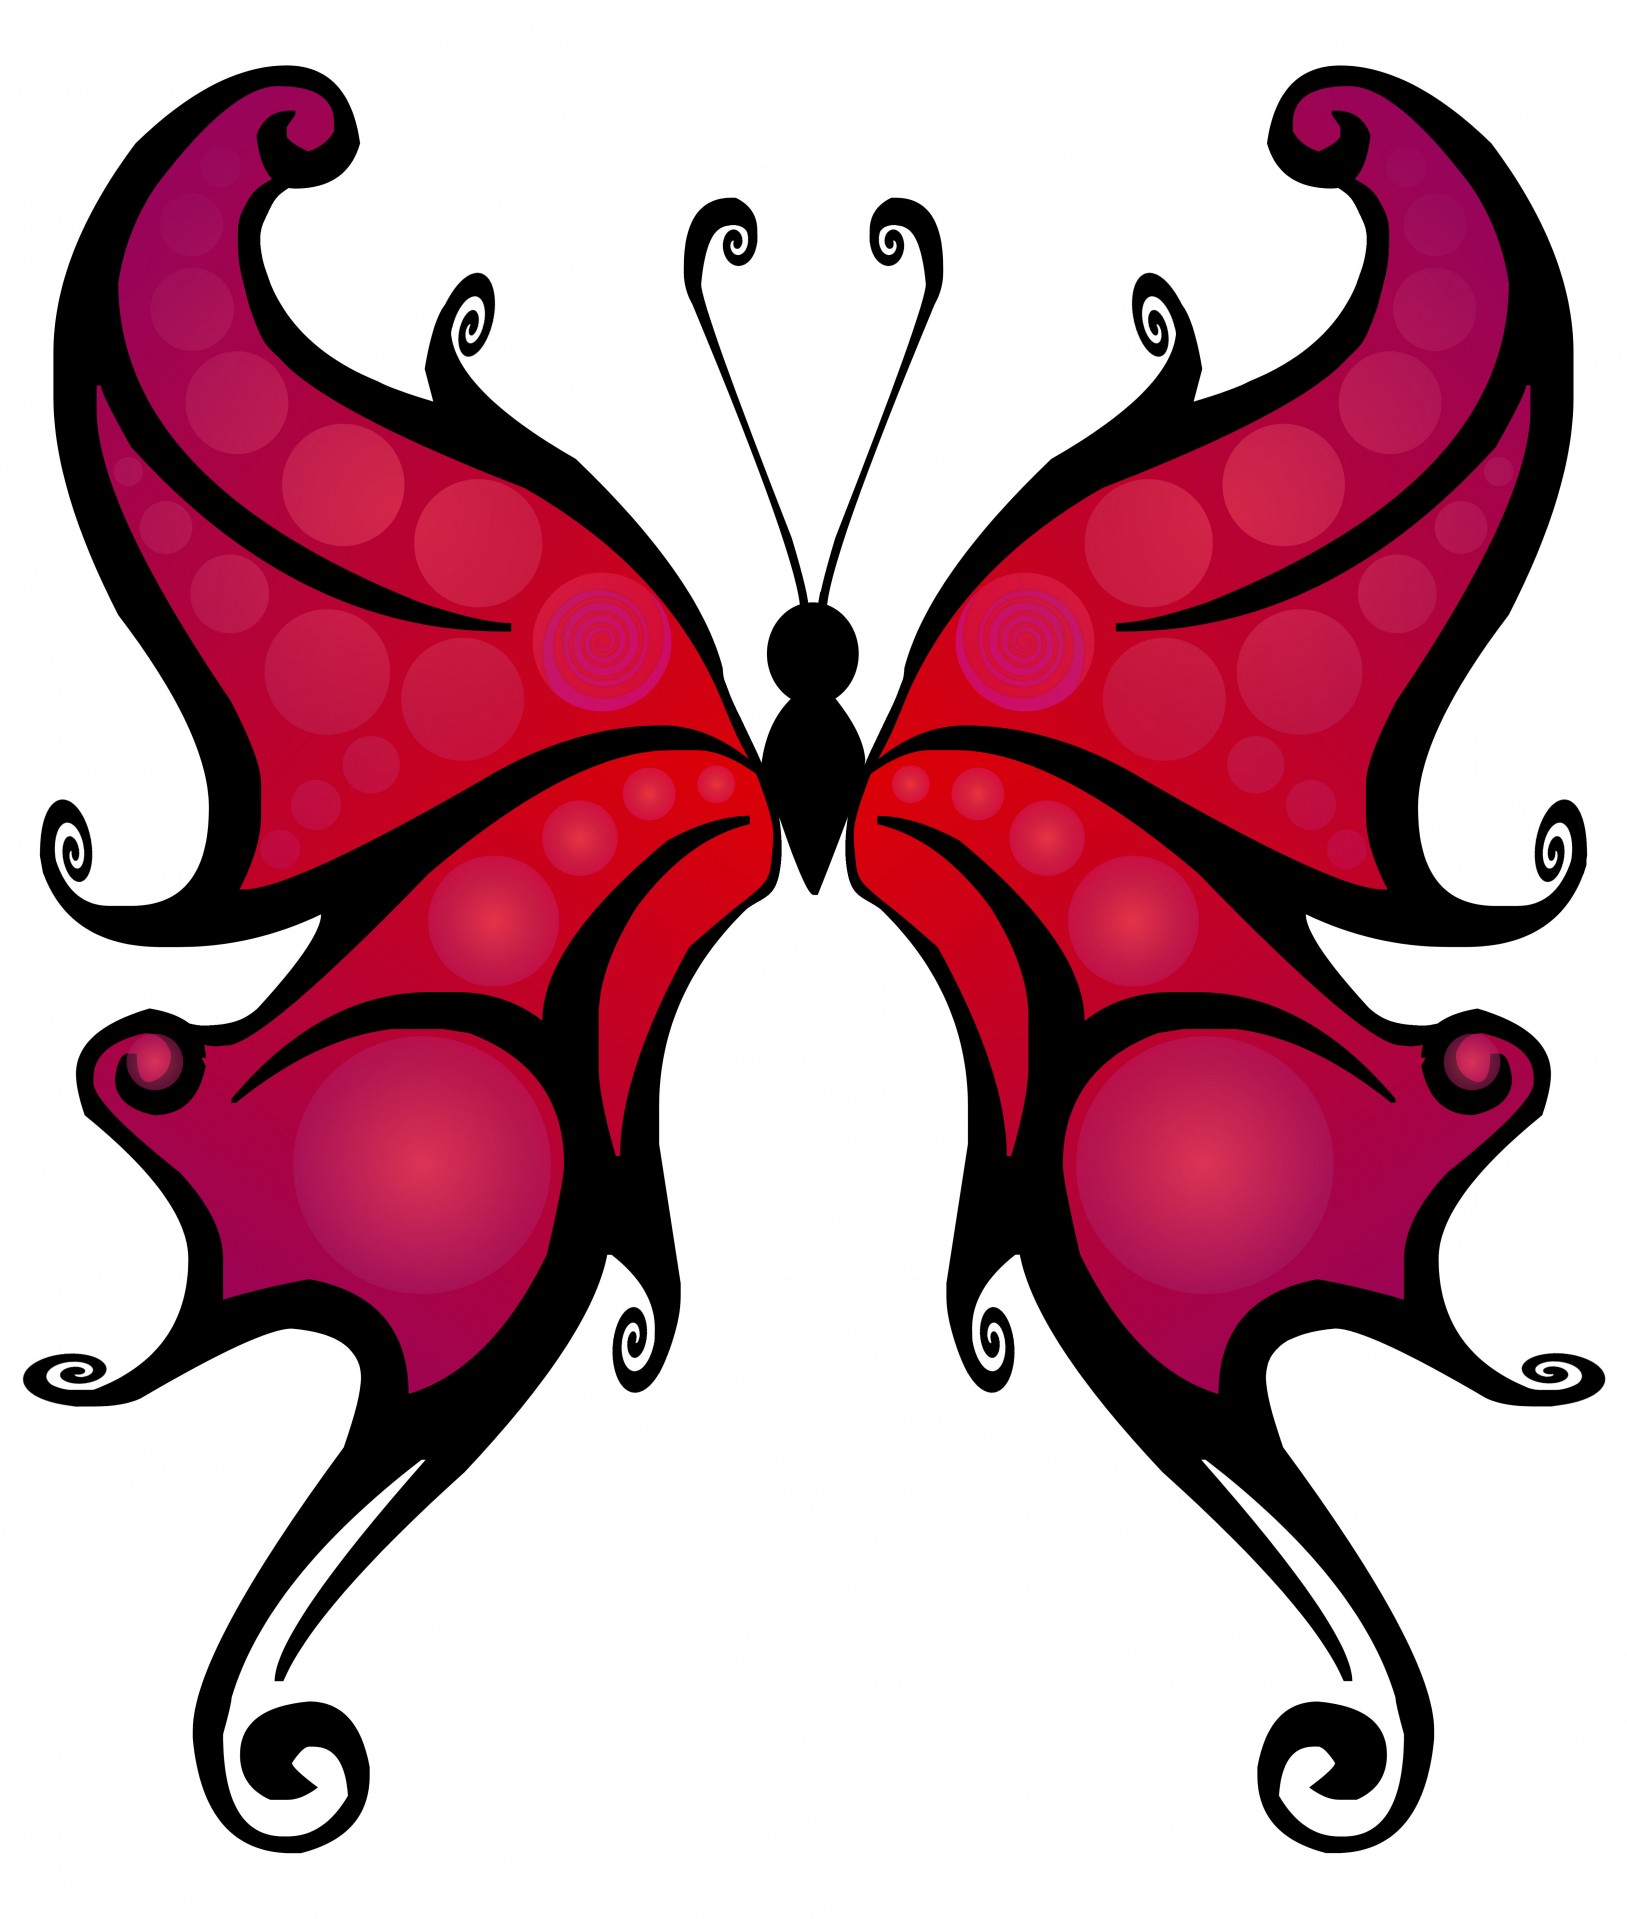 Free stock photo public. 2 clipart butterfly